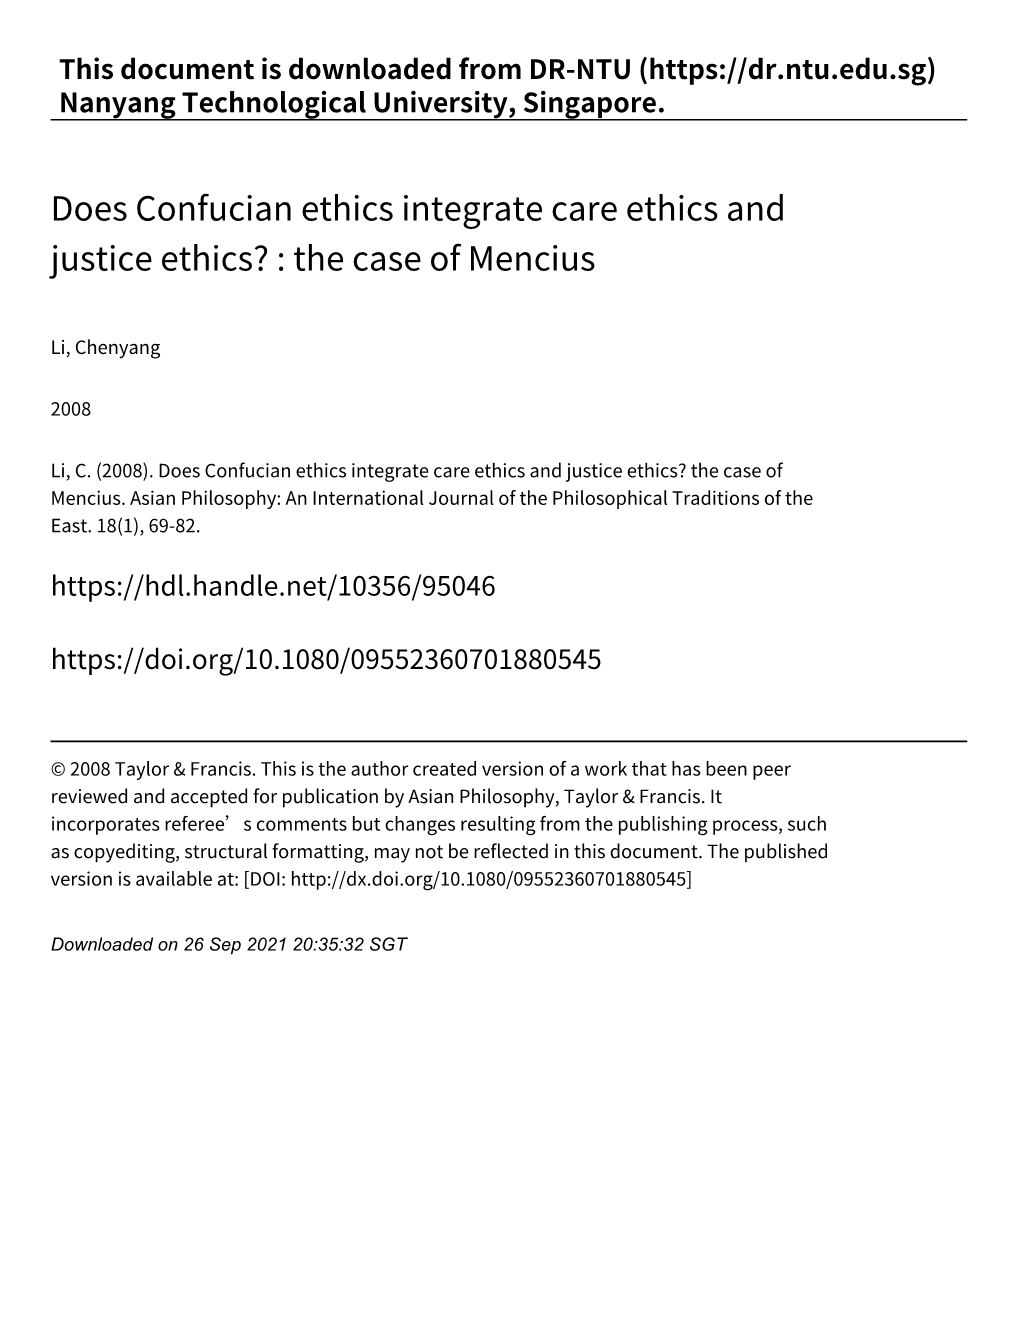 Does Confucian Ethics Integrate Care Ethics and Justice Ethics? : the Case of Mencius